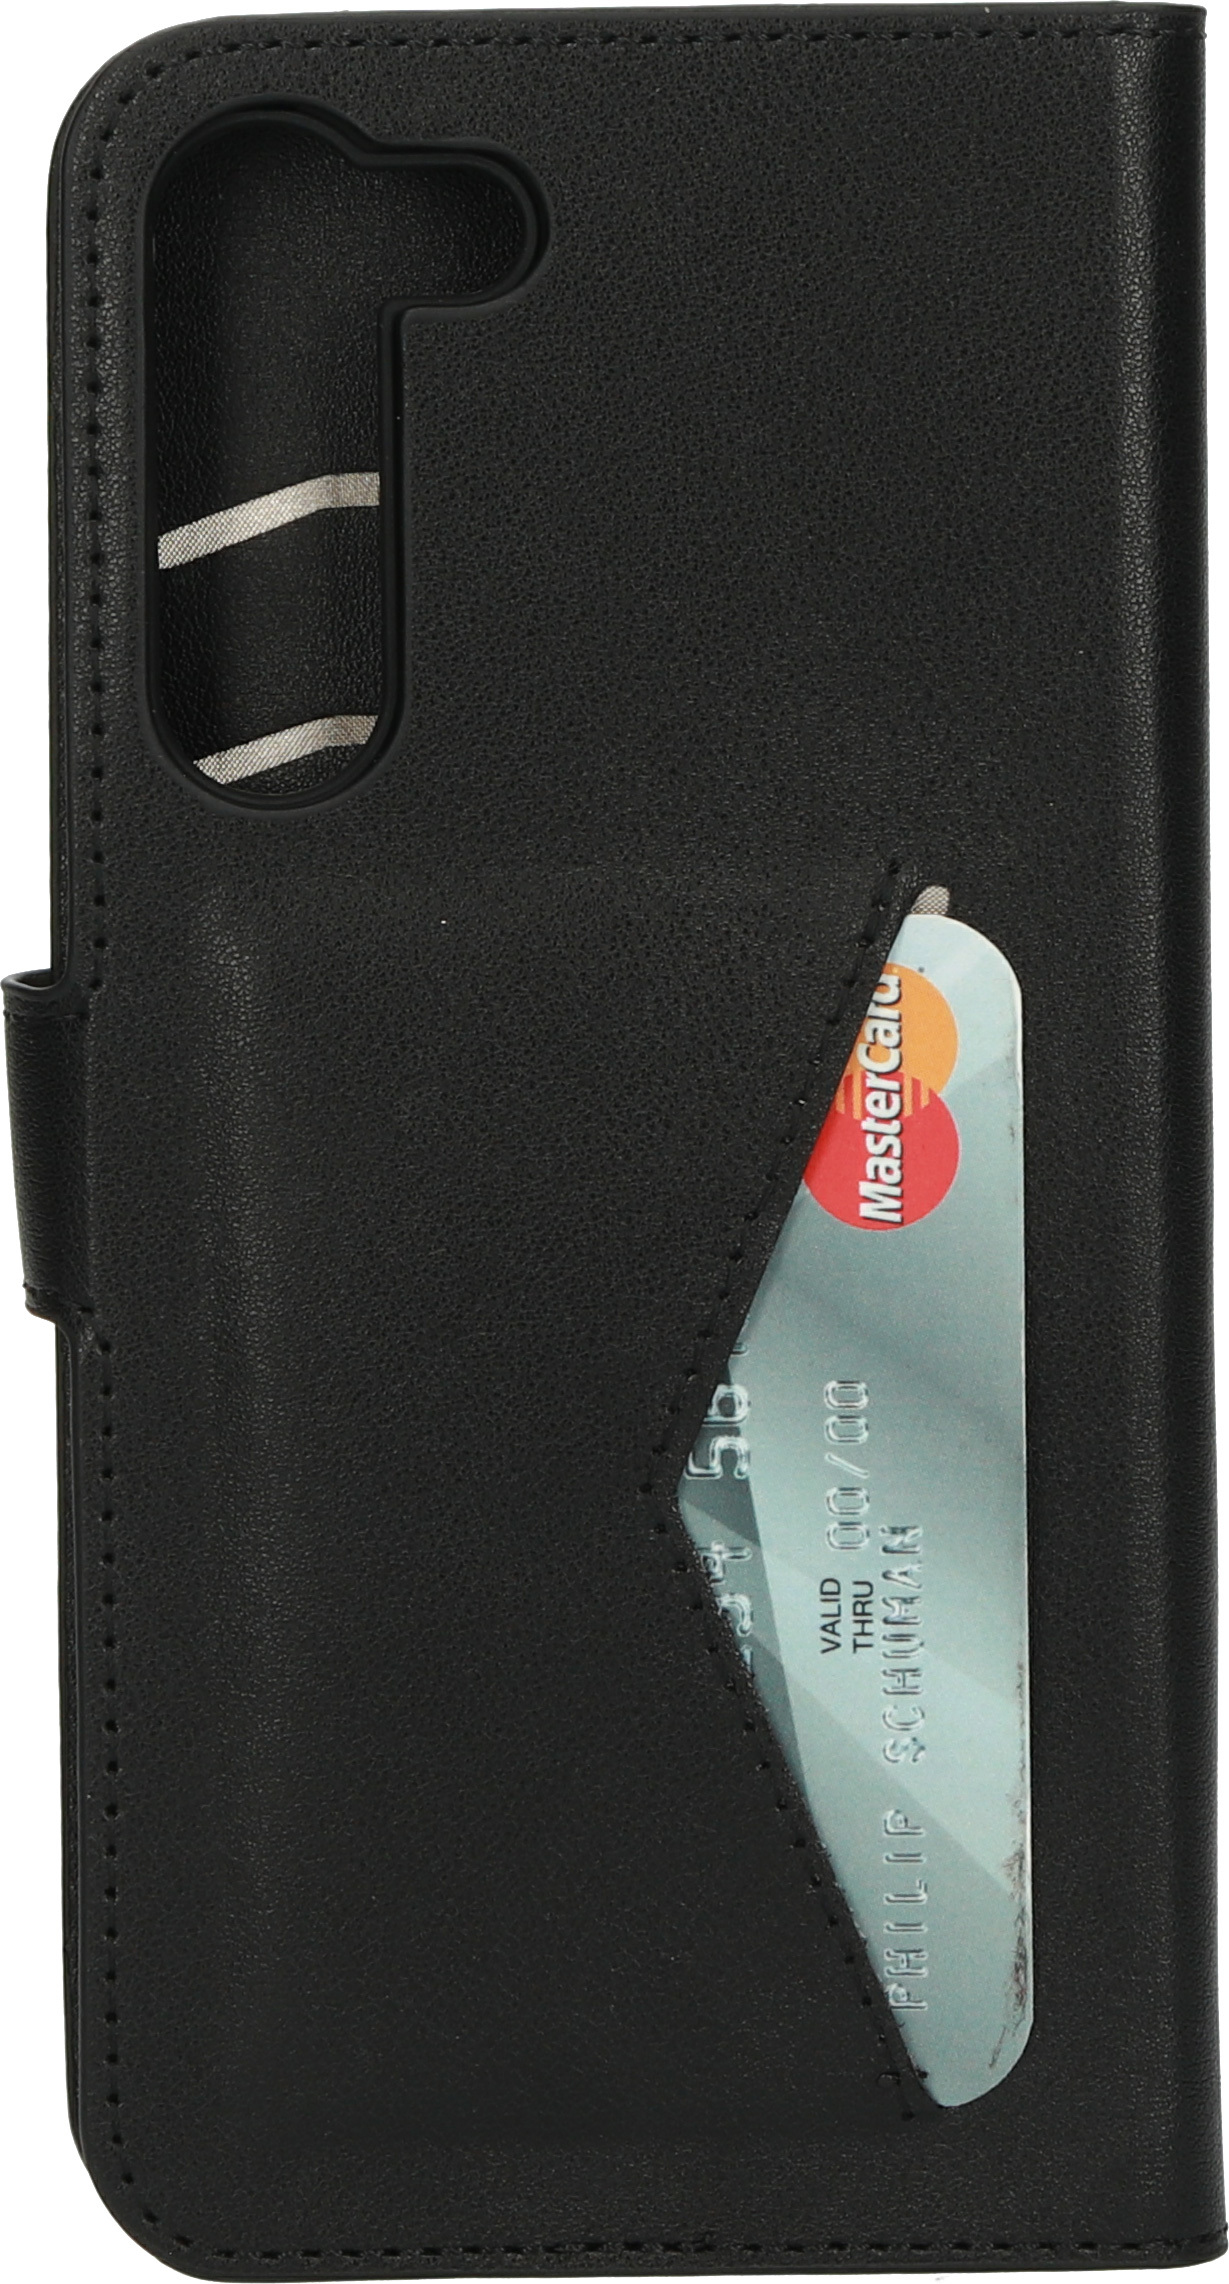 Mobiparts Classic Wallet Case Samsung Galaxy S23 Plus Black